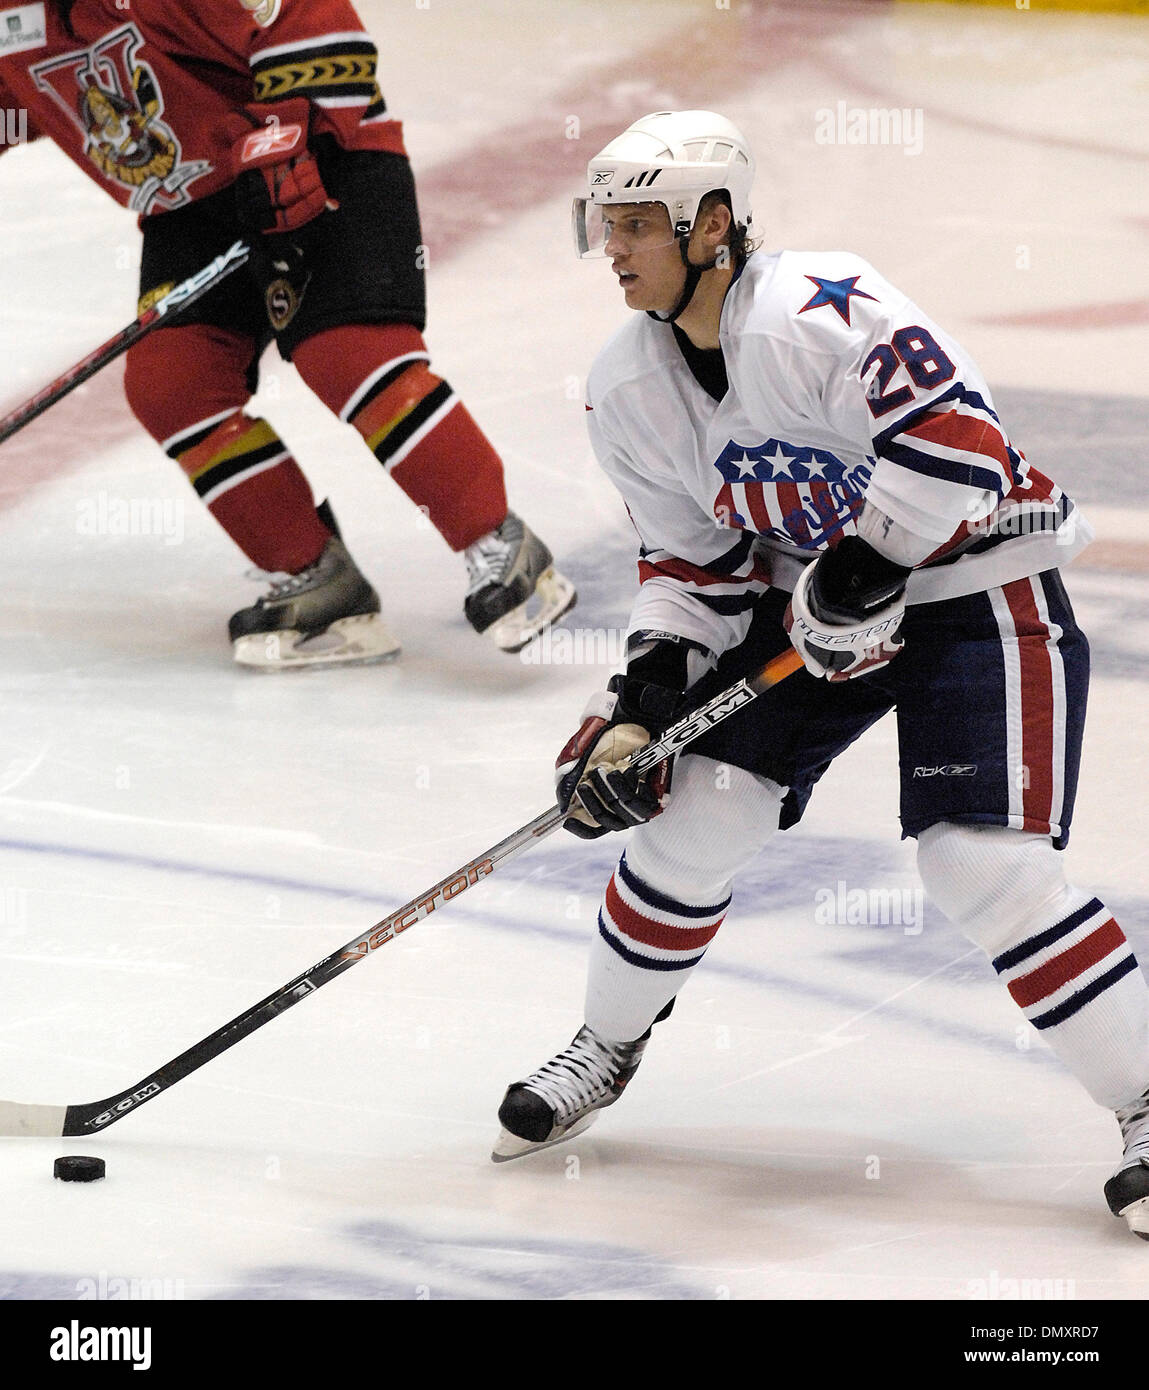 October 13, 2006: AHL - Rochester center Kamil Kreps (28) in action against Binghamton - Binghamton Senators at Rochester Americans at The Blue Cross Arena in Rochester, New York. Rochester defeated Binghamton in a shootout.(Credit Image: © Alan Schwartz/Cal Sport Media) Stock Photo